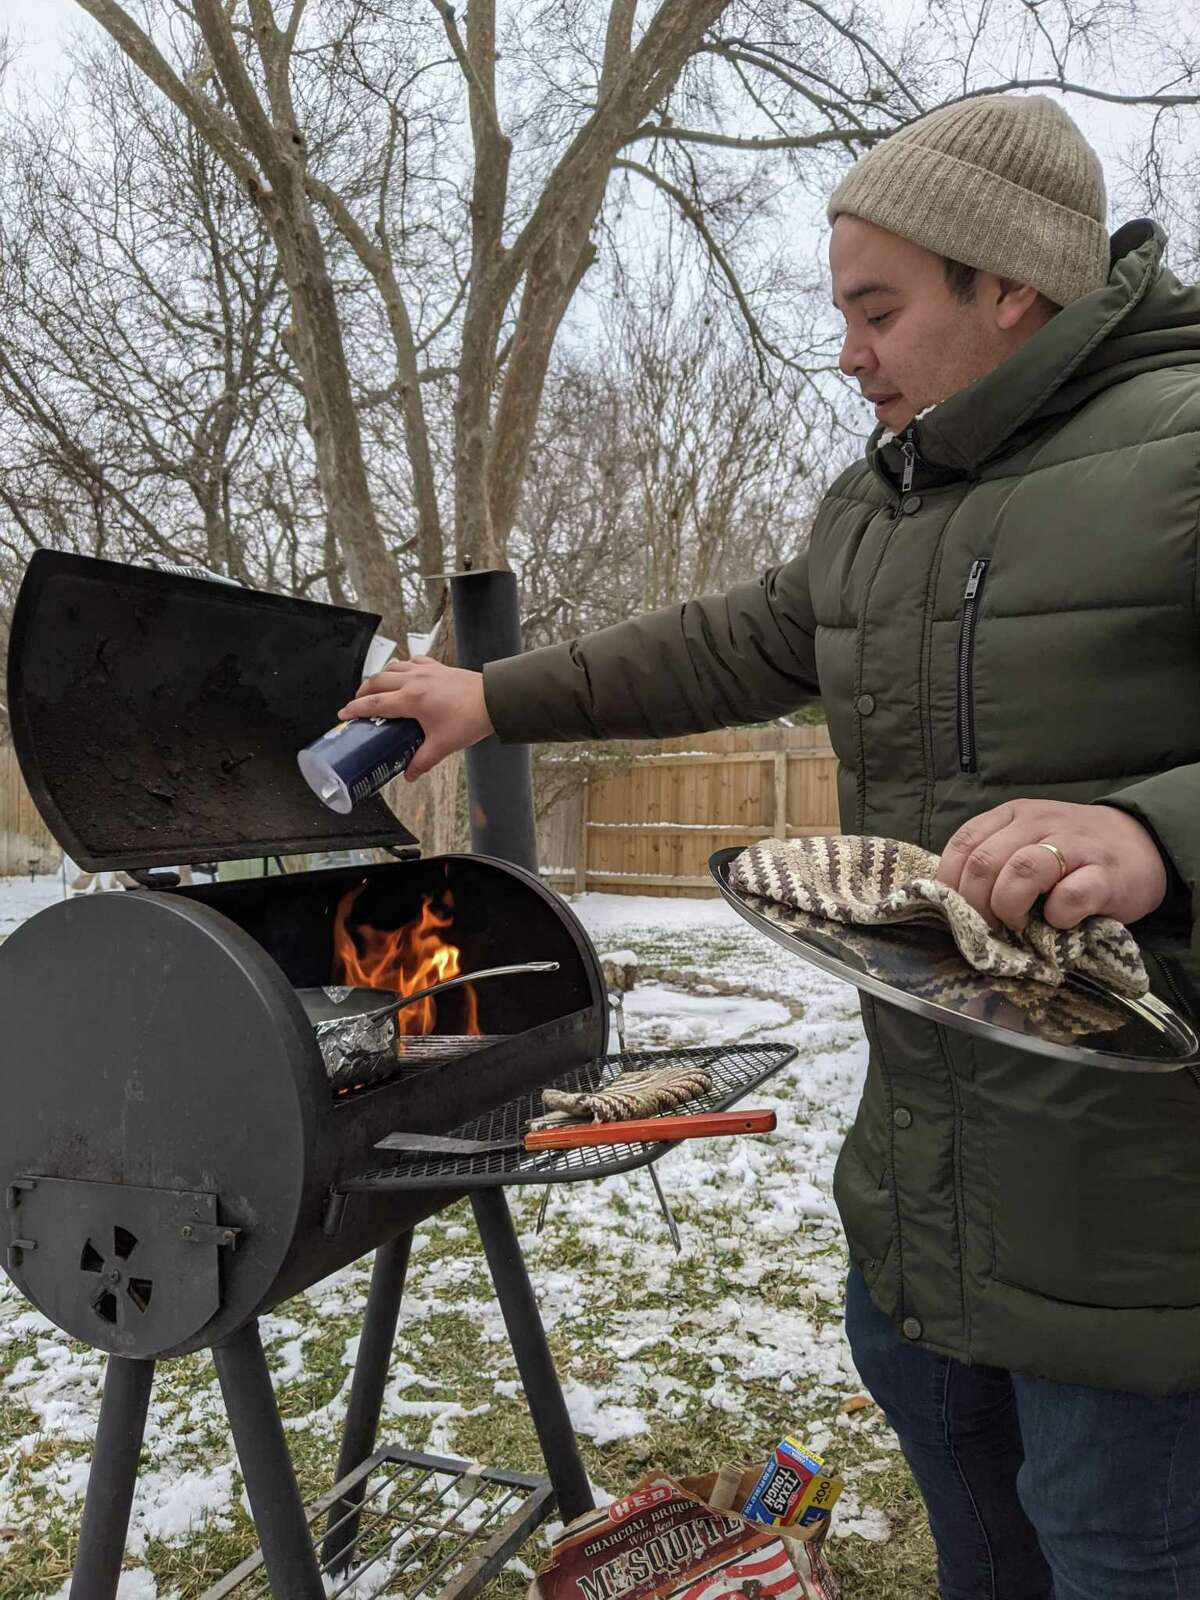 Francisco Chagolla Retzloff cooks on an outdoor grill he used to prepare almost every meal he and his husband Timothy Chagolla Retzloff ate for three days while the power was off in their North West side home. Timothy said he'll never be caught short on firewood and charcoal again.